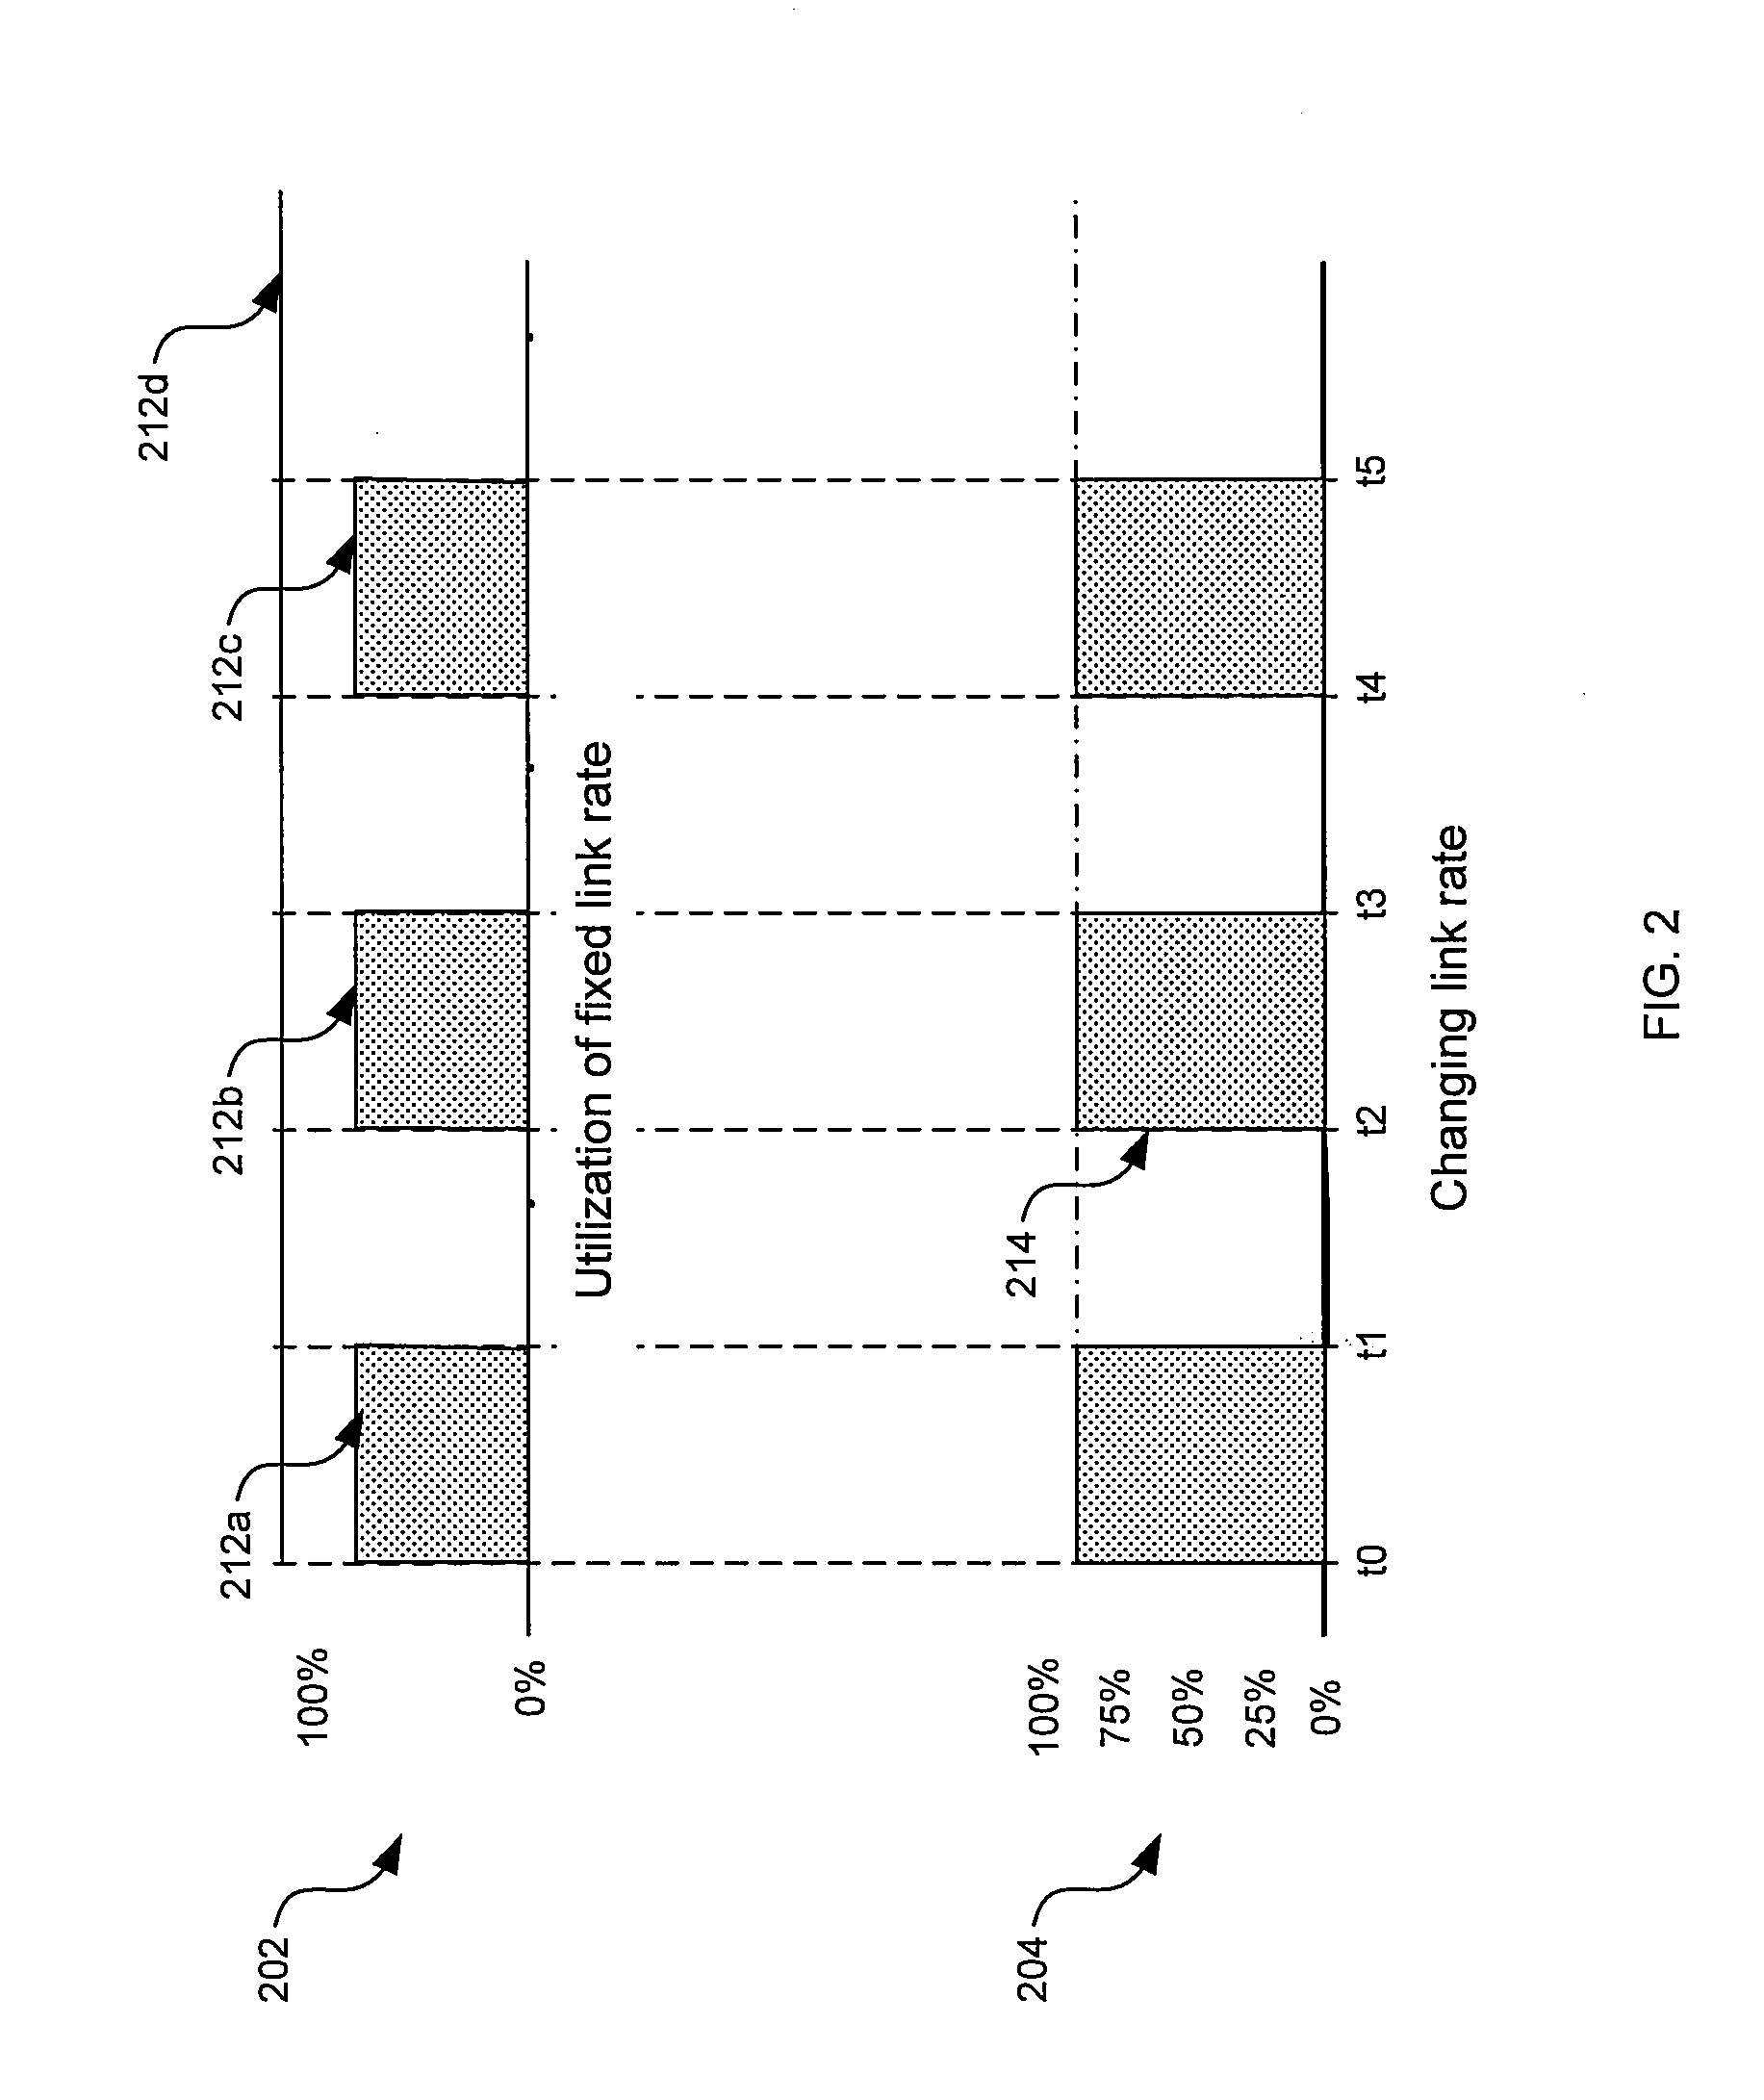 Method And System For Negotiating Multiple Data Rate Transitions On An Ethernet Link